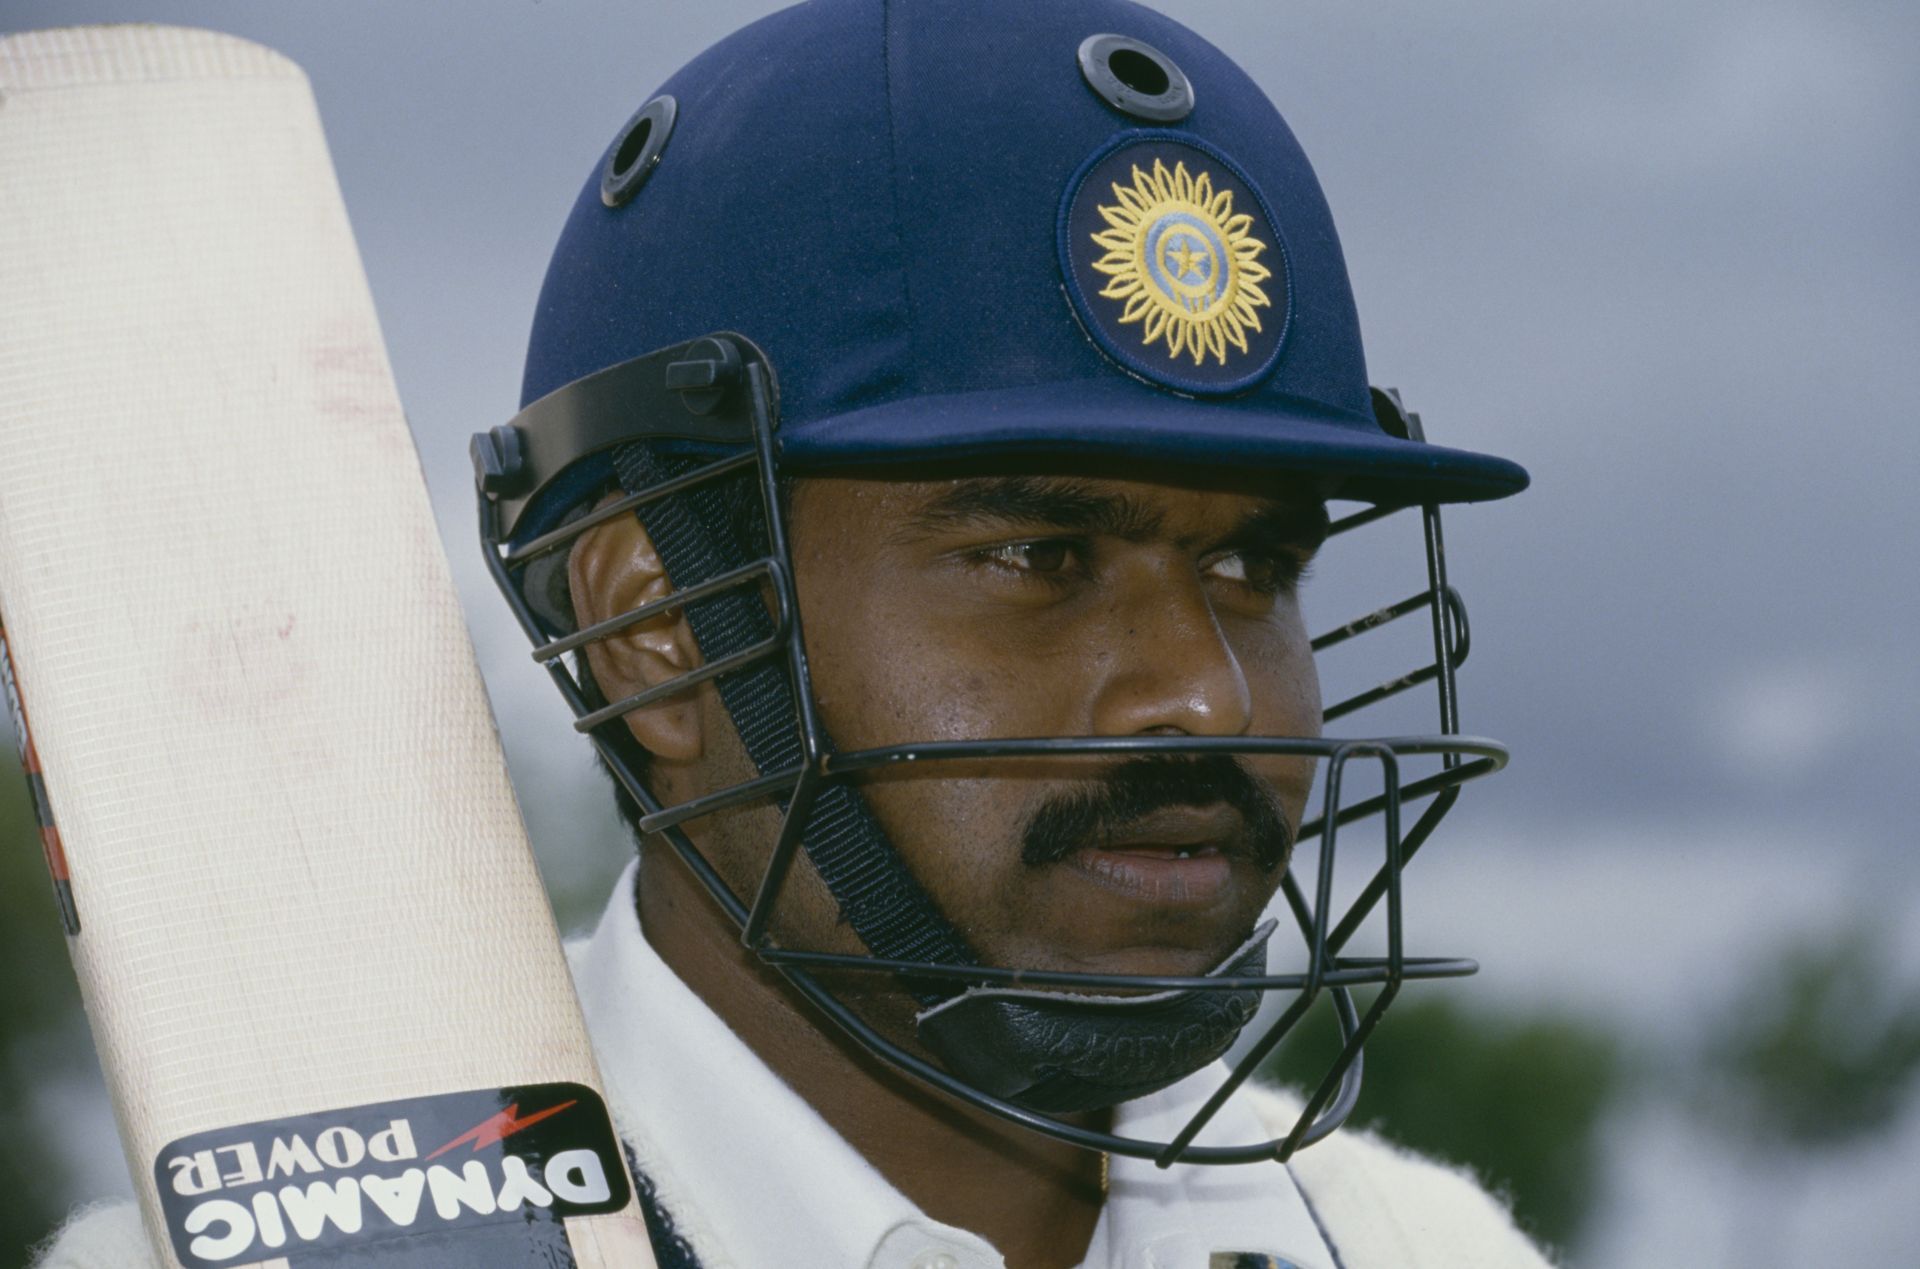 Former India batter Pravin Amre scored a hundred in South Africa on Test debut. (Pic: Getty Images)